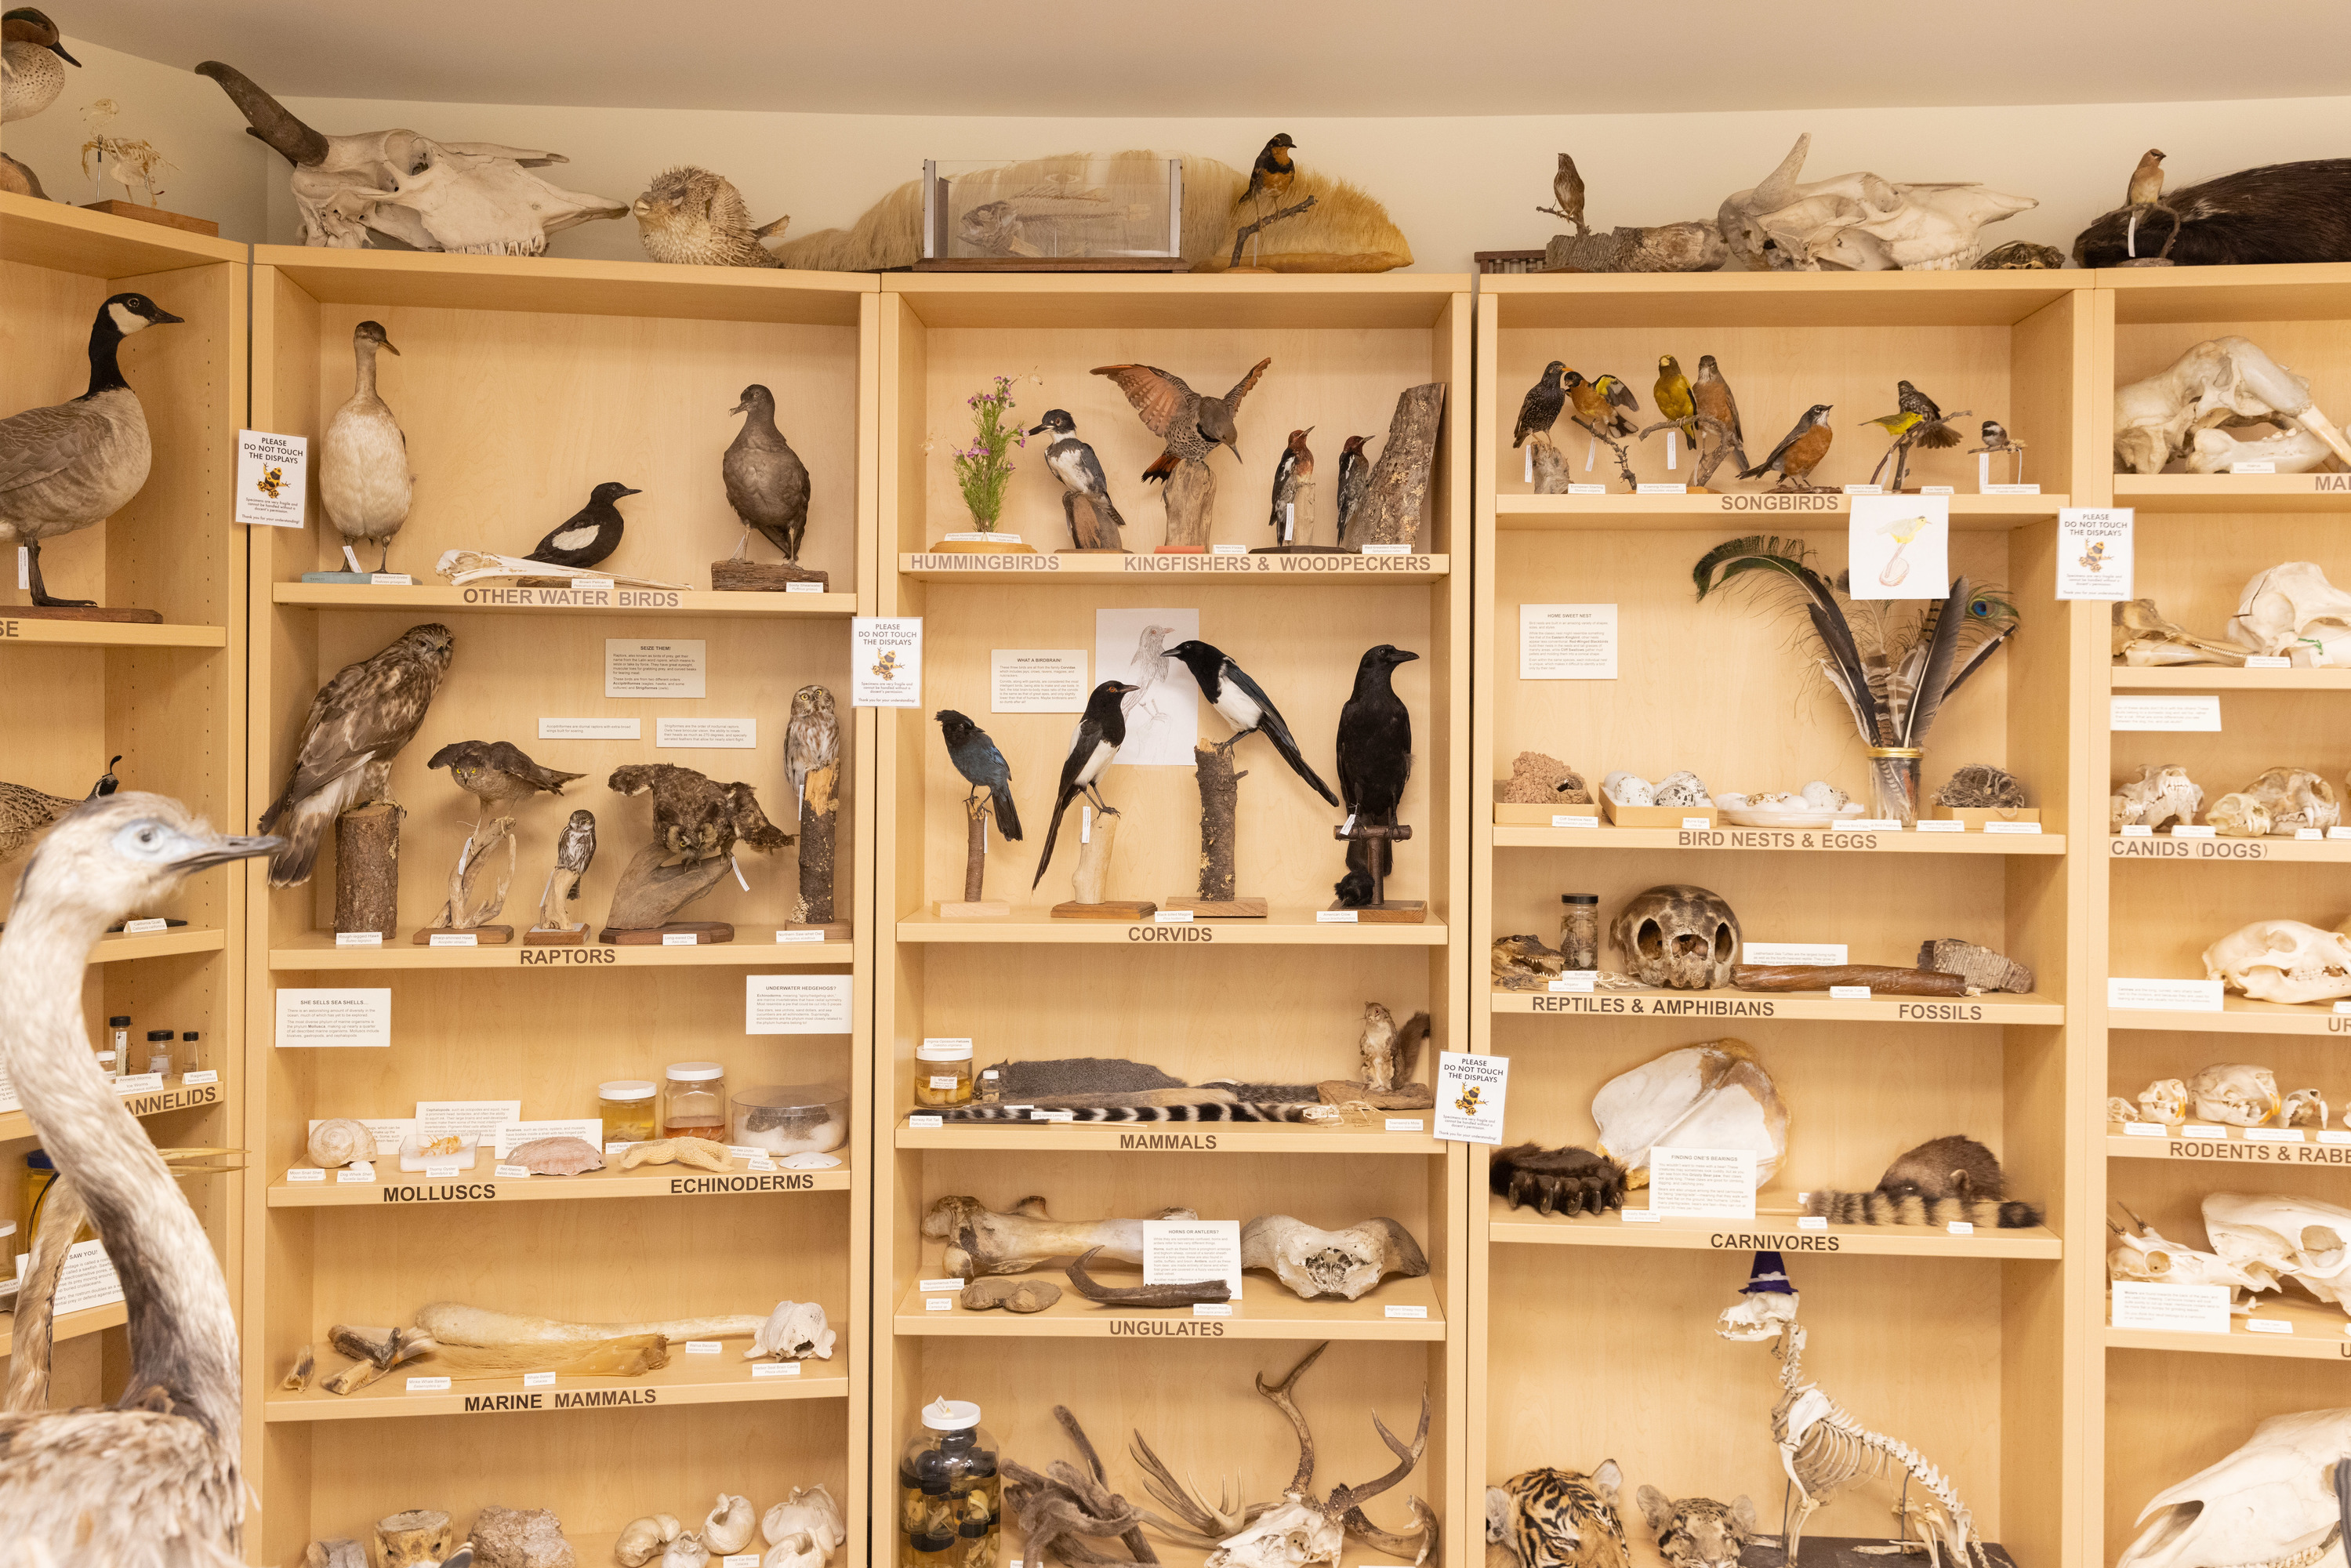 Specimens on display in the Museum of Natural History